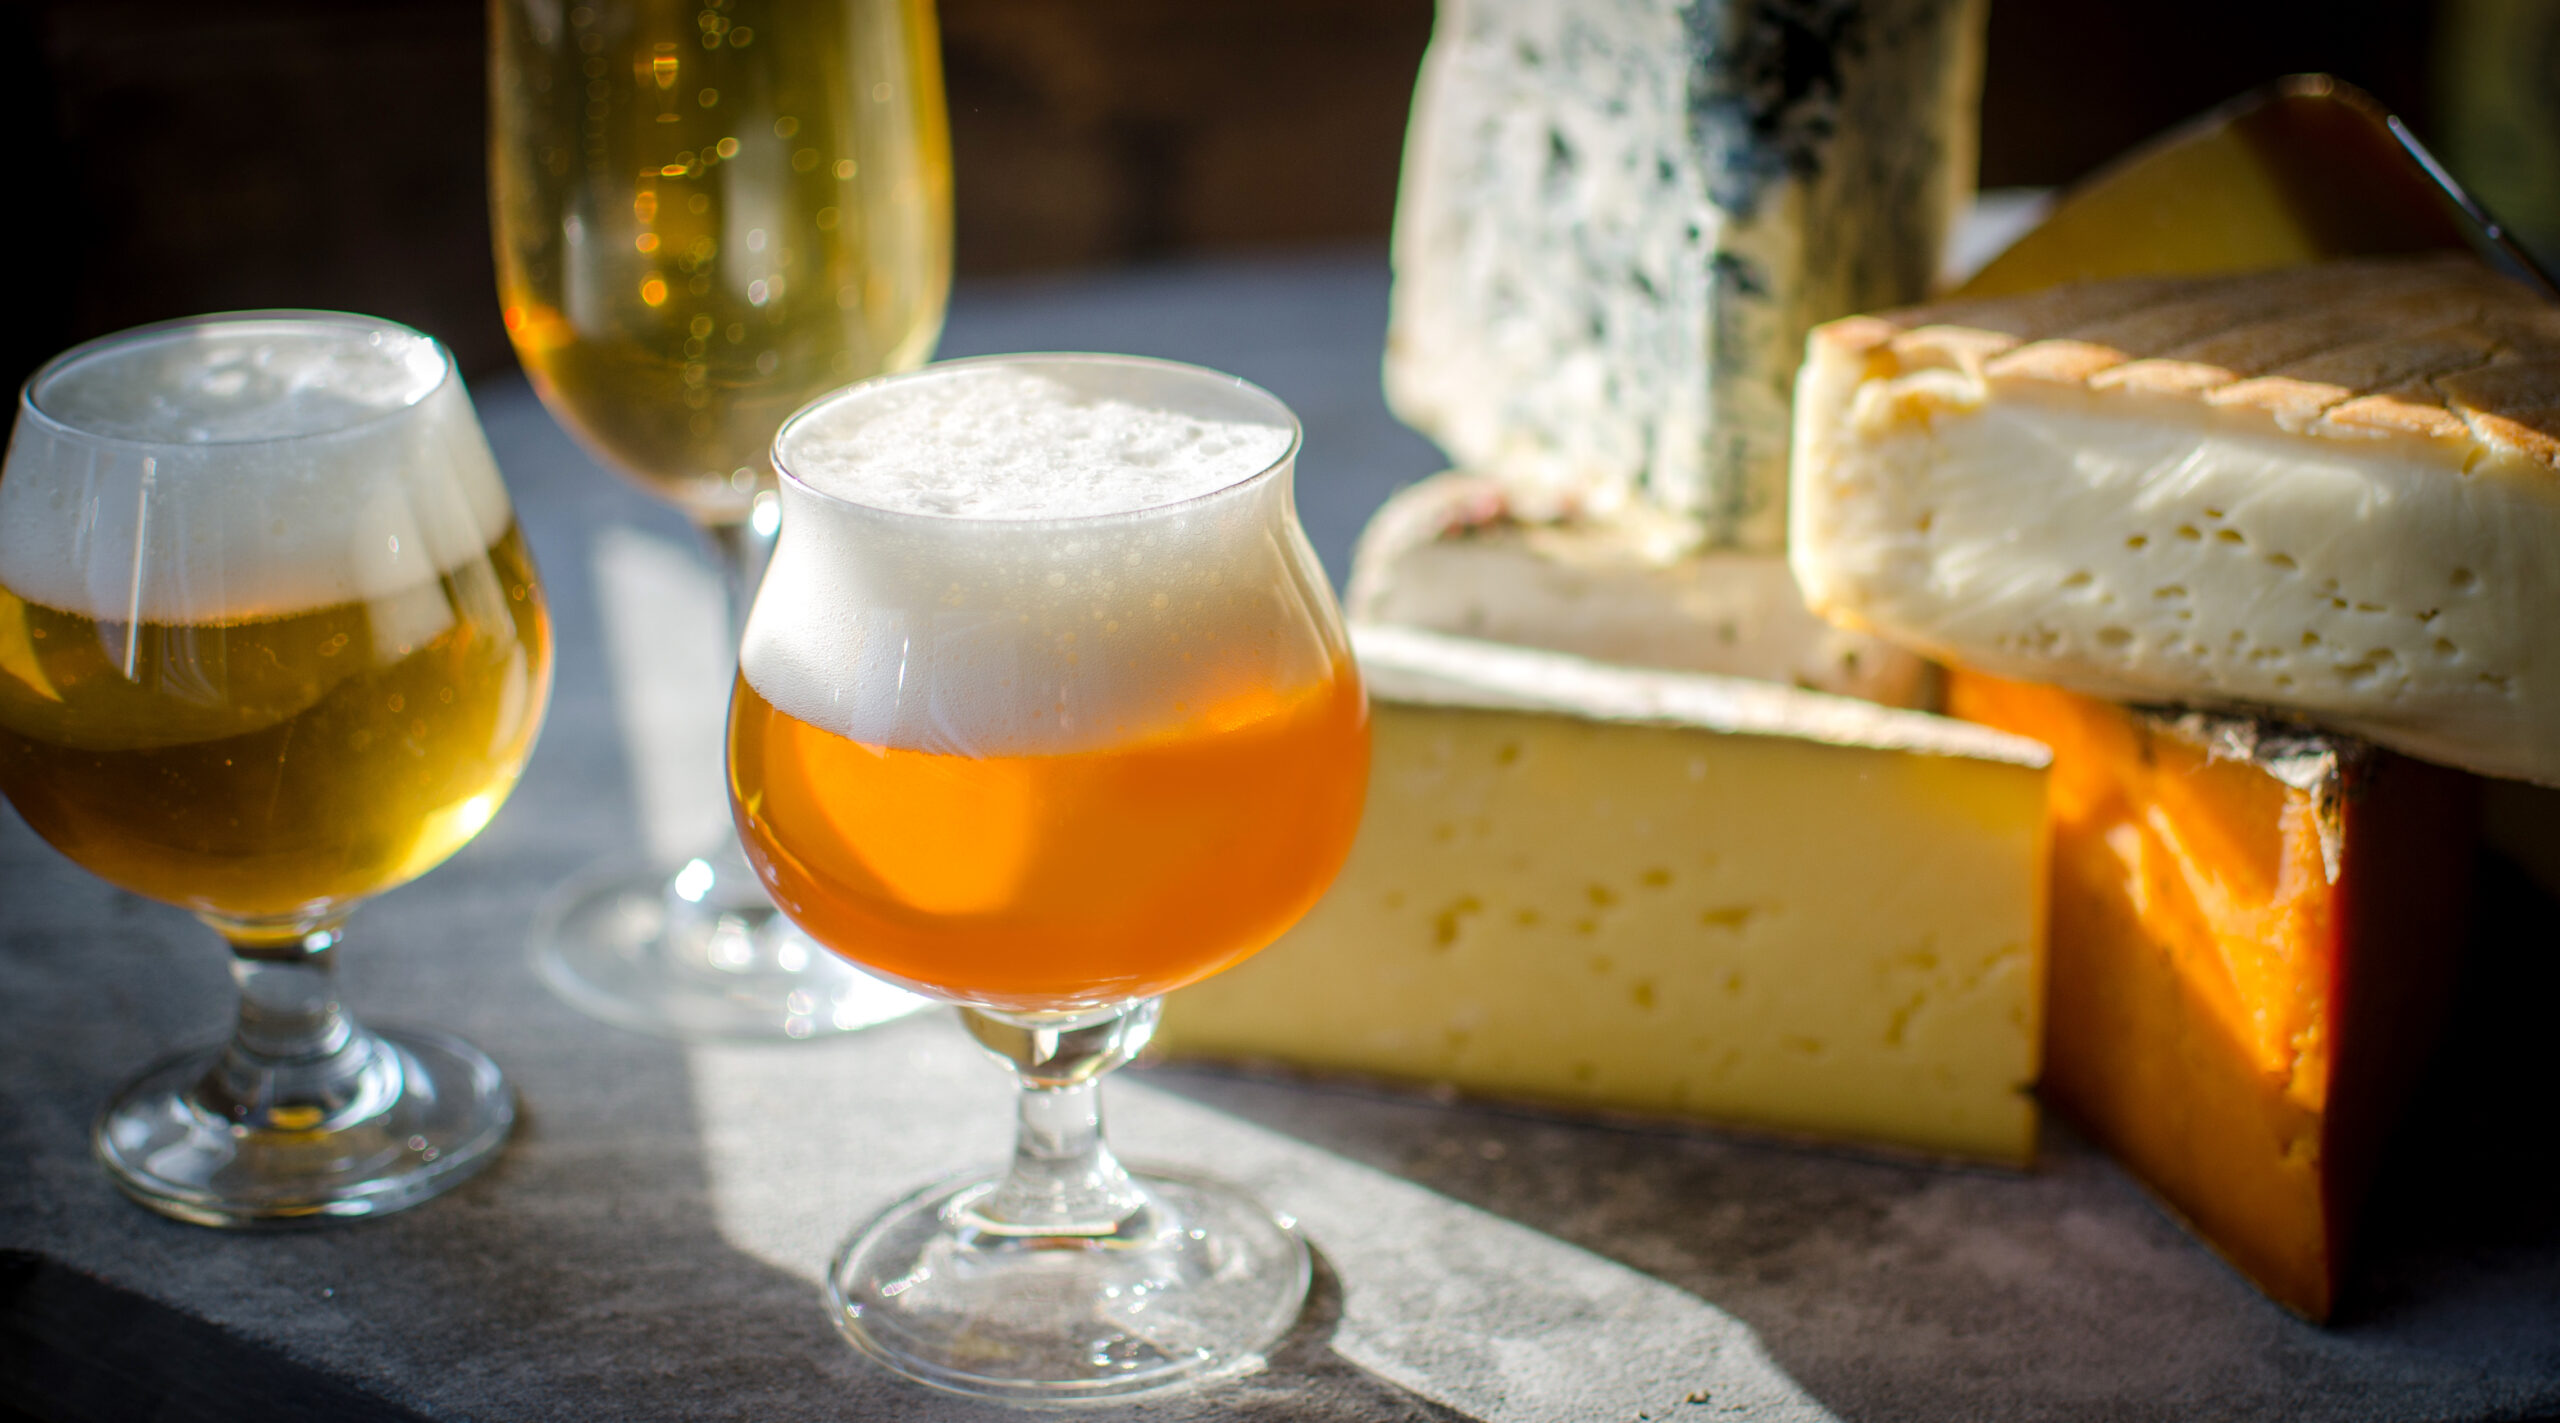 How to pair american craft beer with cheese or charcuterie